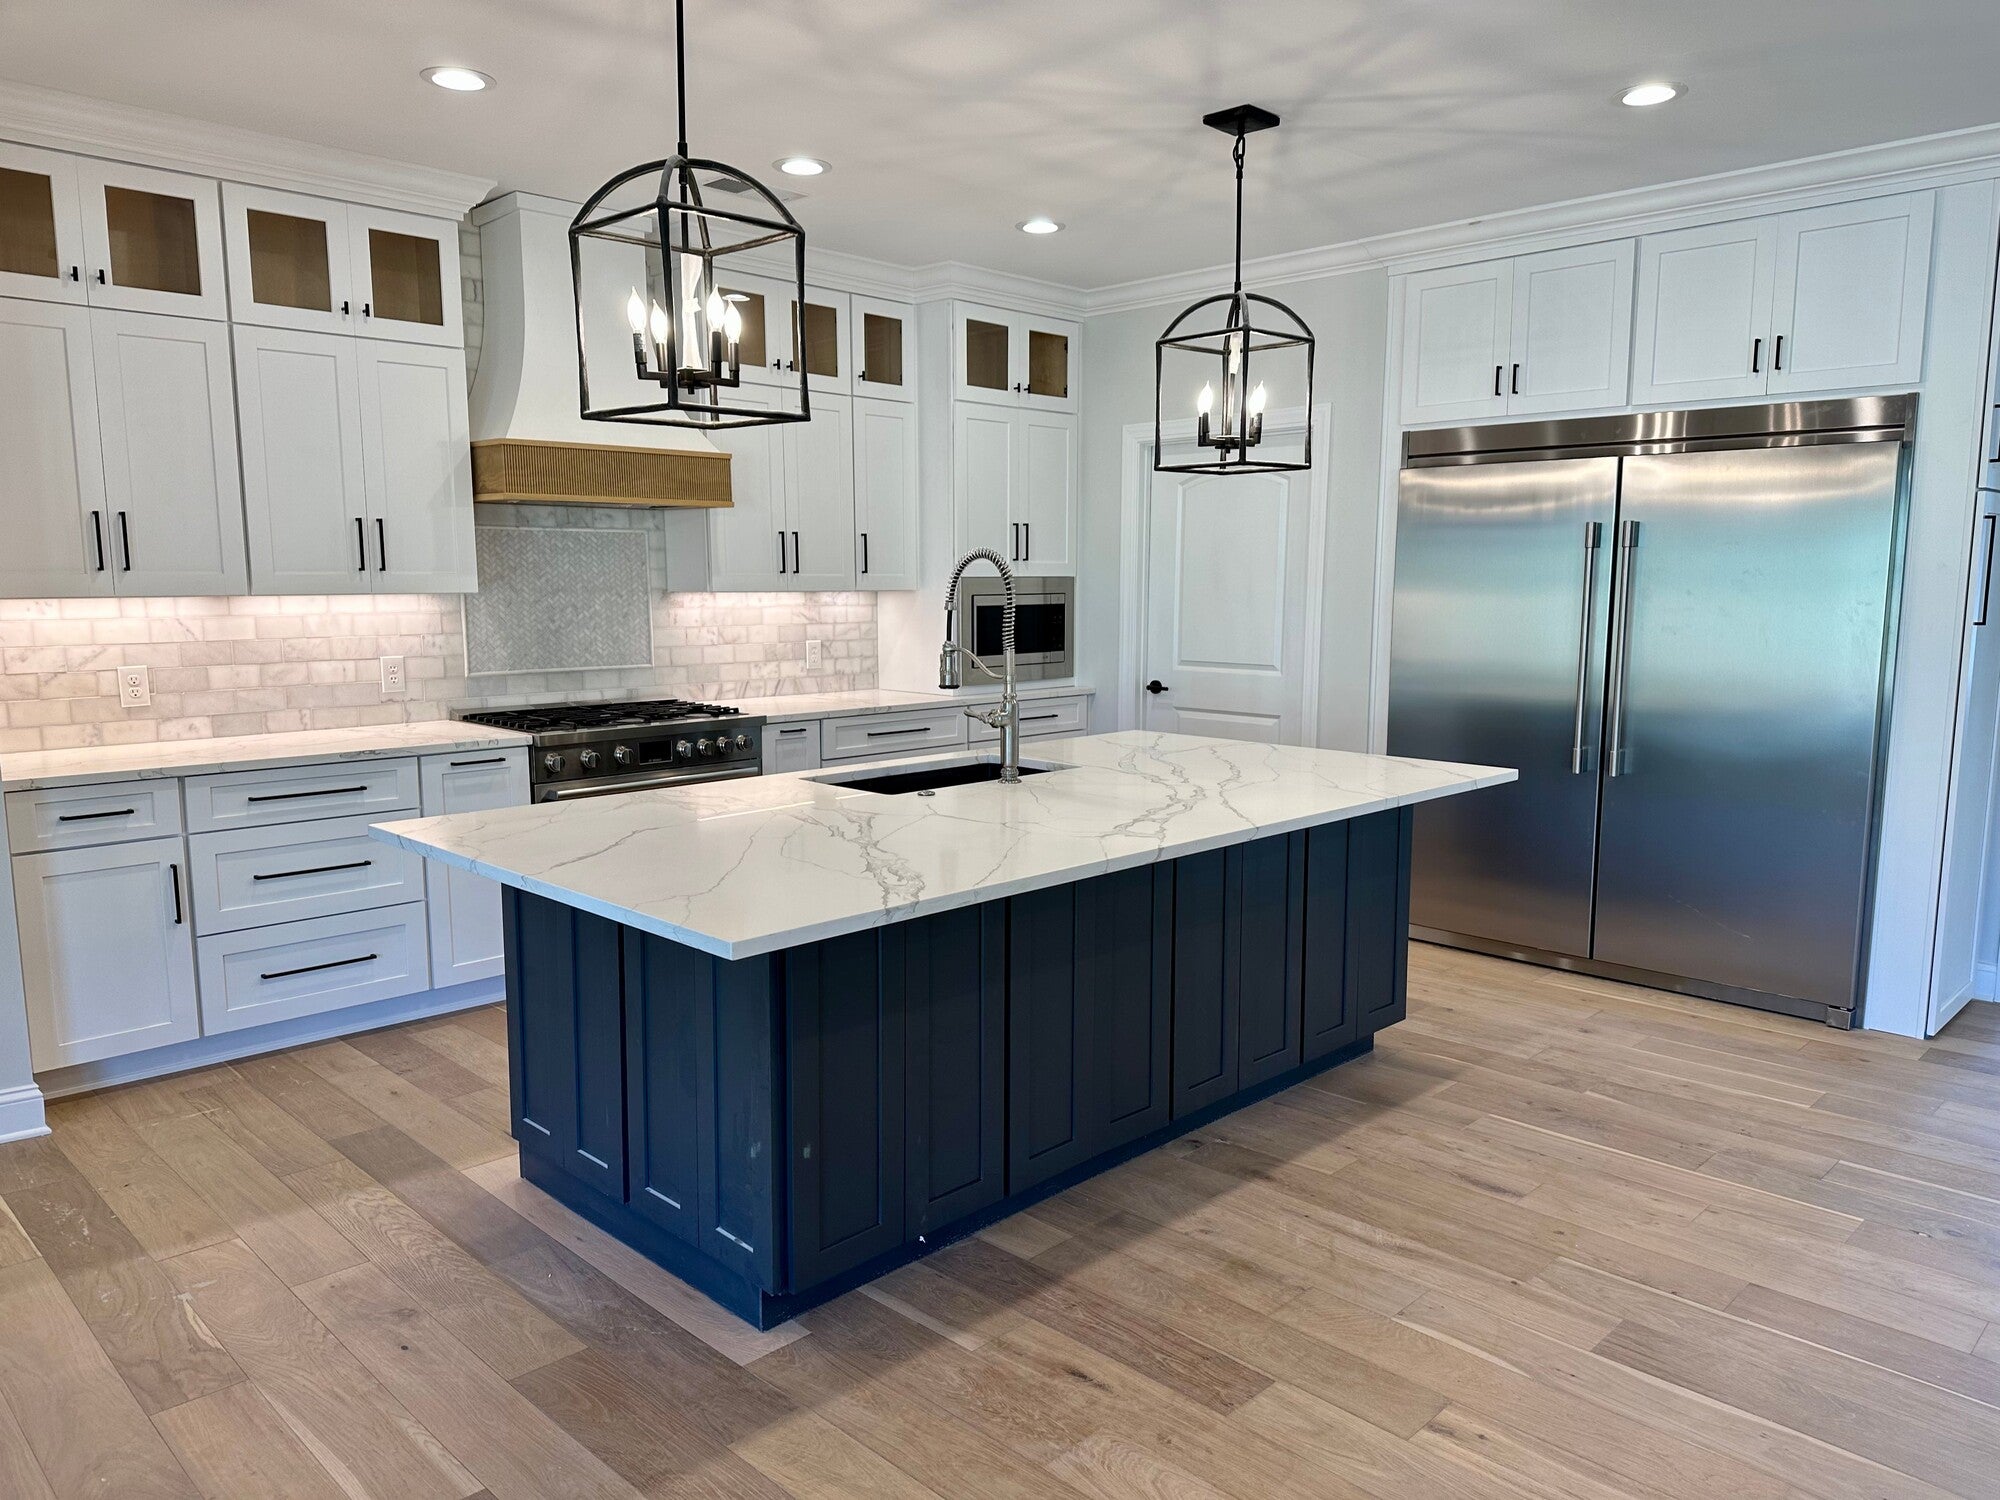  Modern kitchen with a marble island, dark blue base, stainless steel appliances, and white cabinets.